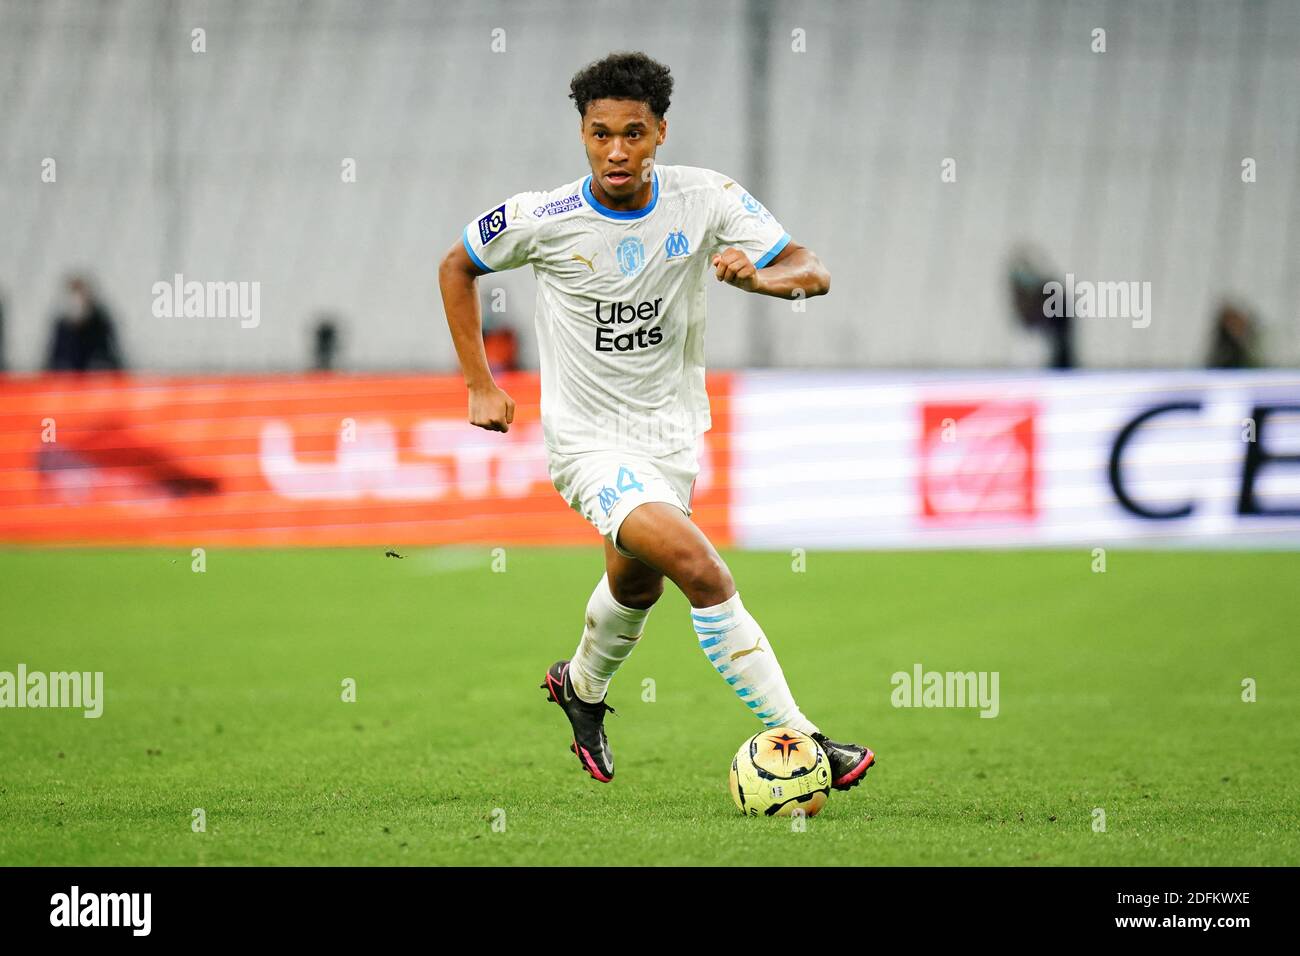 Boubacar Kamara (OM) during the French Ligue 1 Olympique de Marseille (OM)  vs Football Club Girondin de Bordeaux (FCGB) football match at the Orange  Velodrome, in Marseille, France on October 17, 2020.